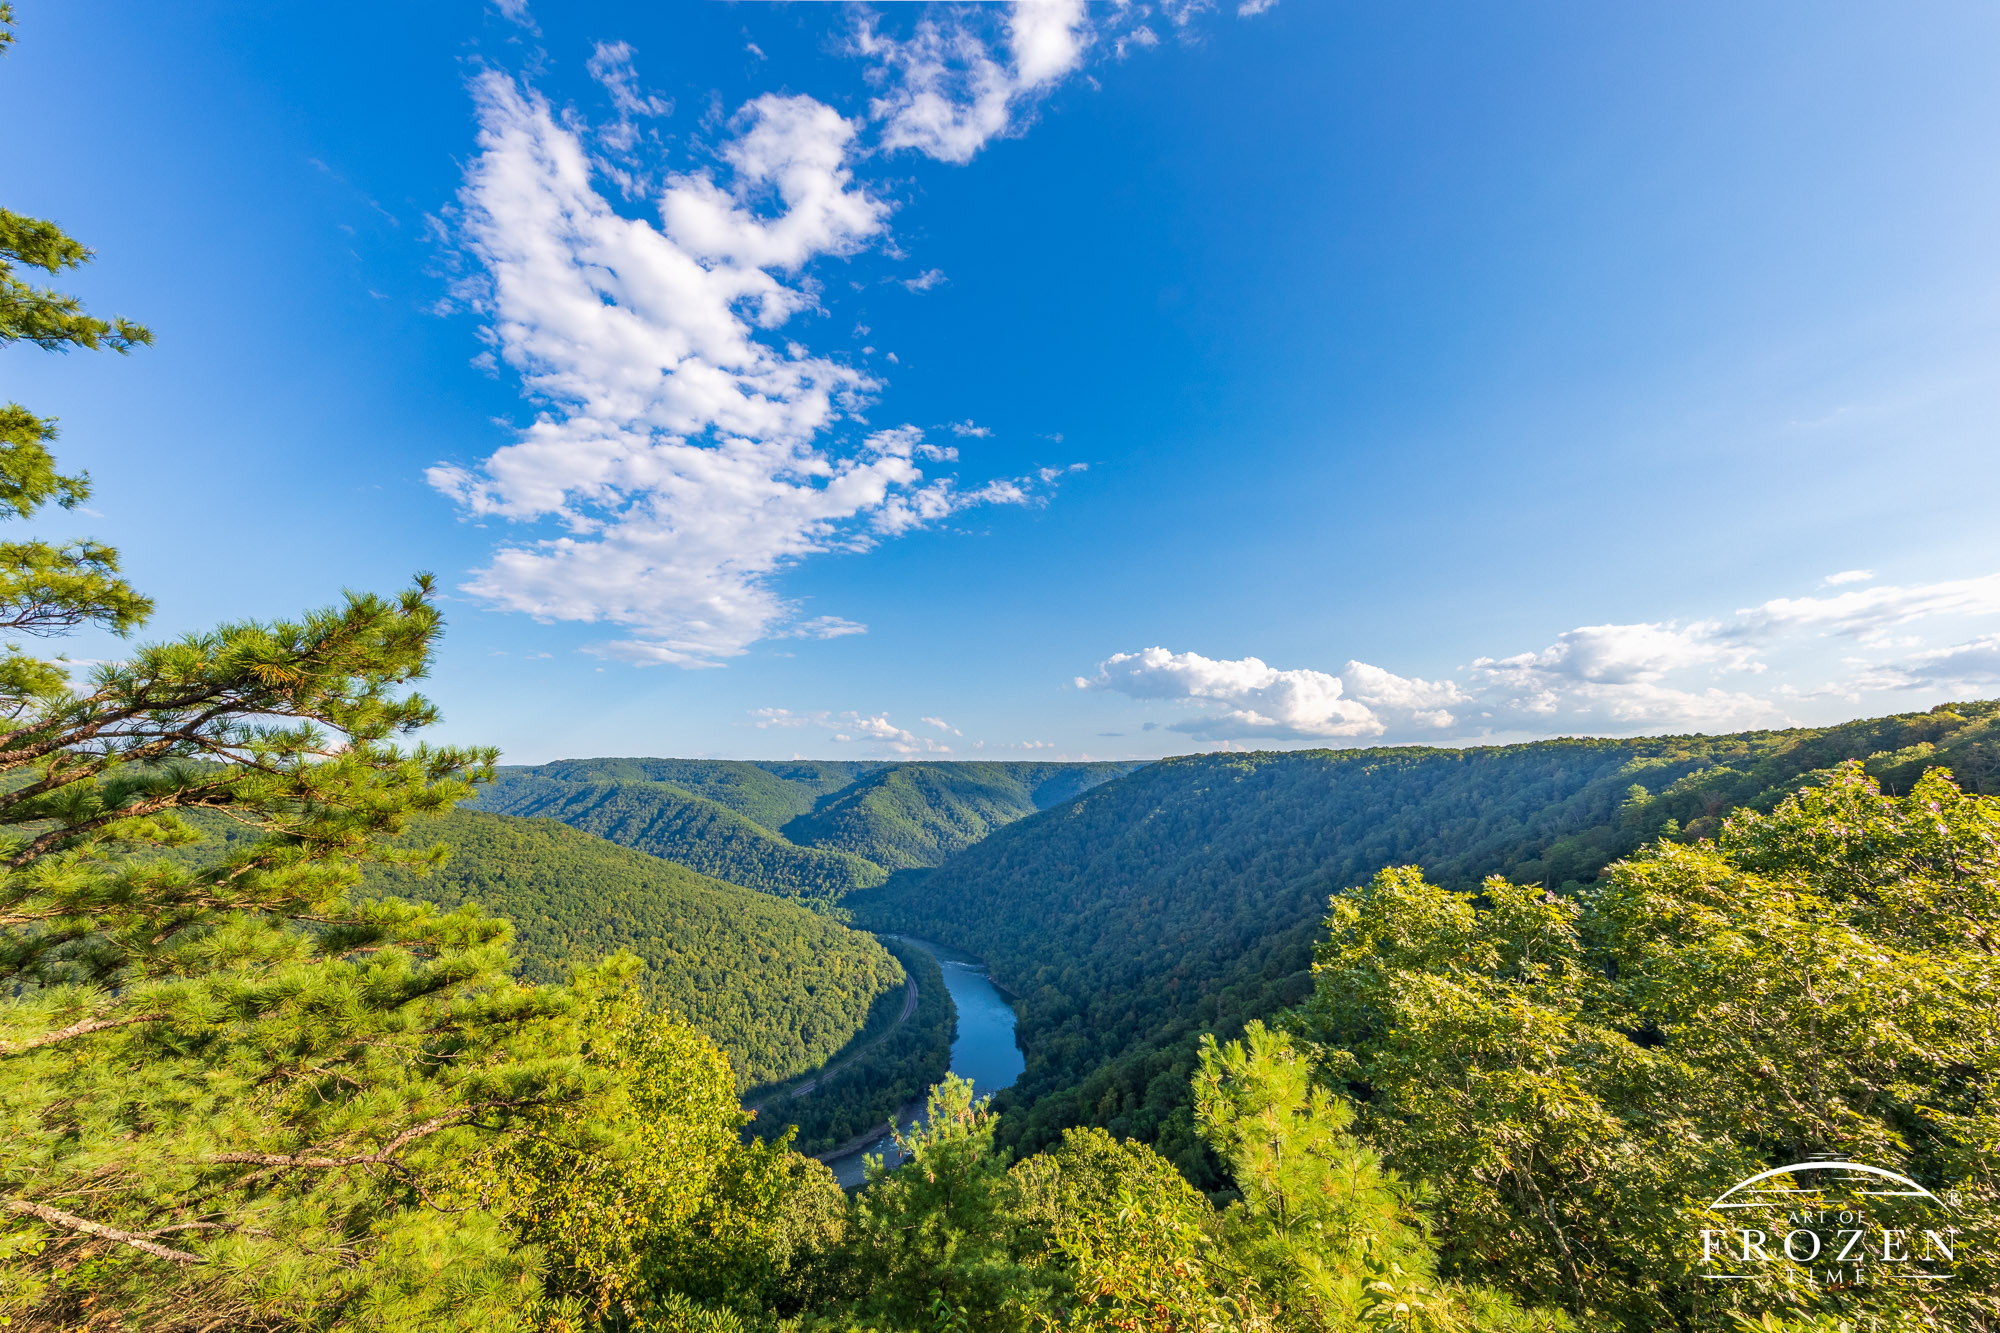 A panoramic view from the New River Gorge National River’s Turkey Spur Overlook which offers vast views to the New River Gorge and blue skies